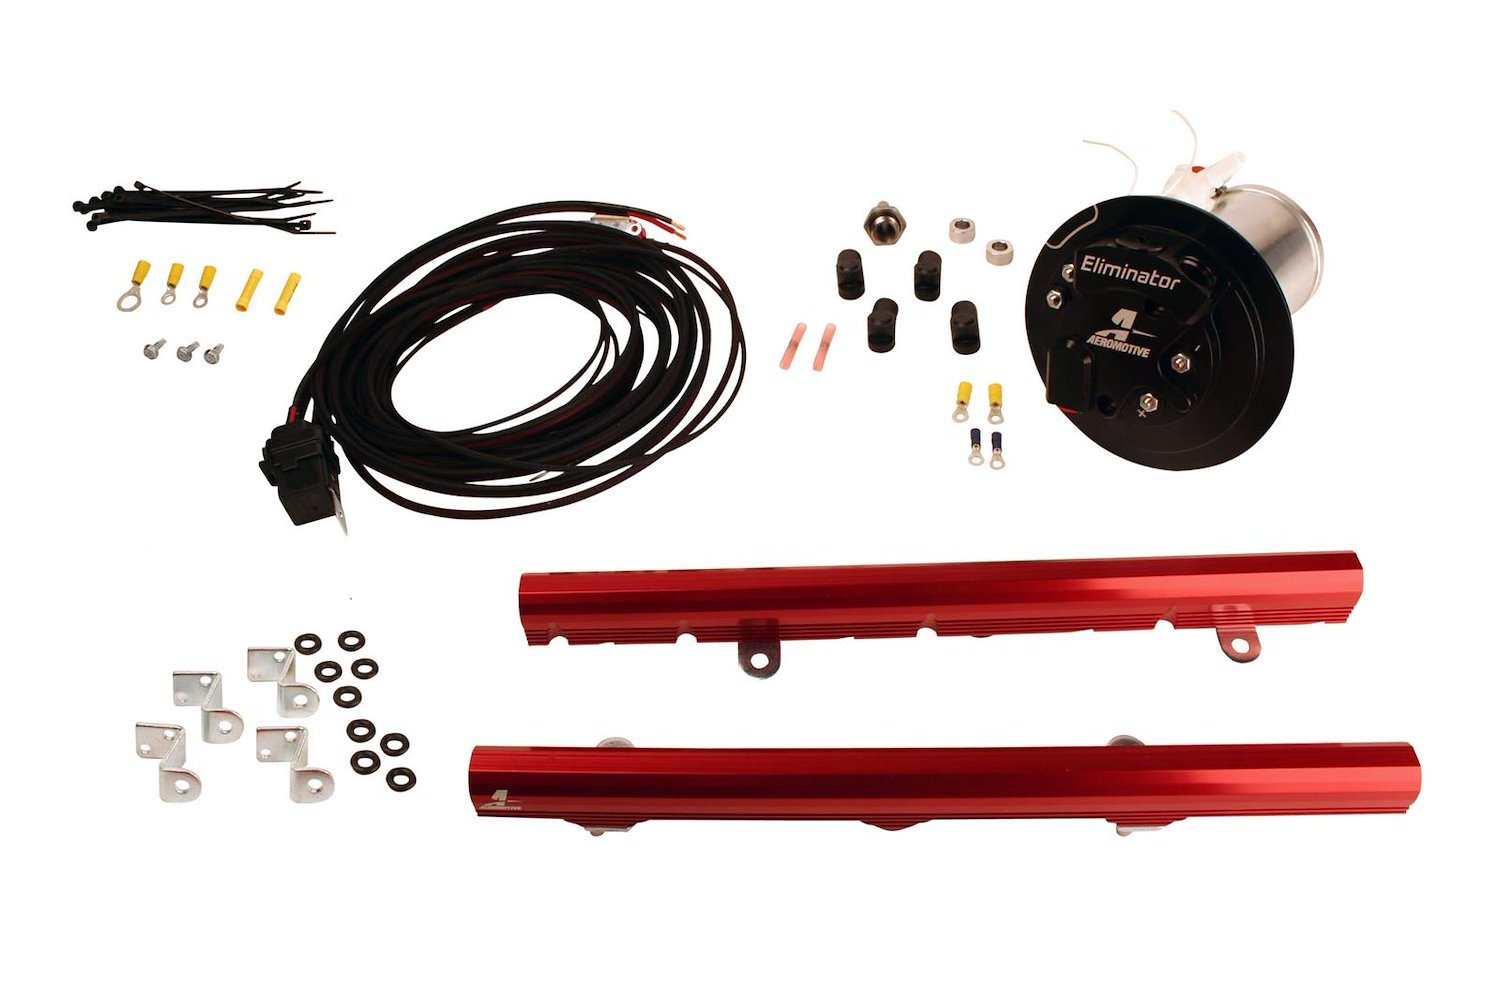 2010-2011 Stealth Fuel System Kits